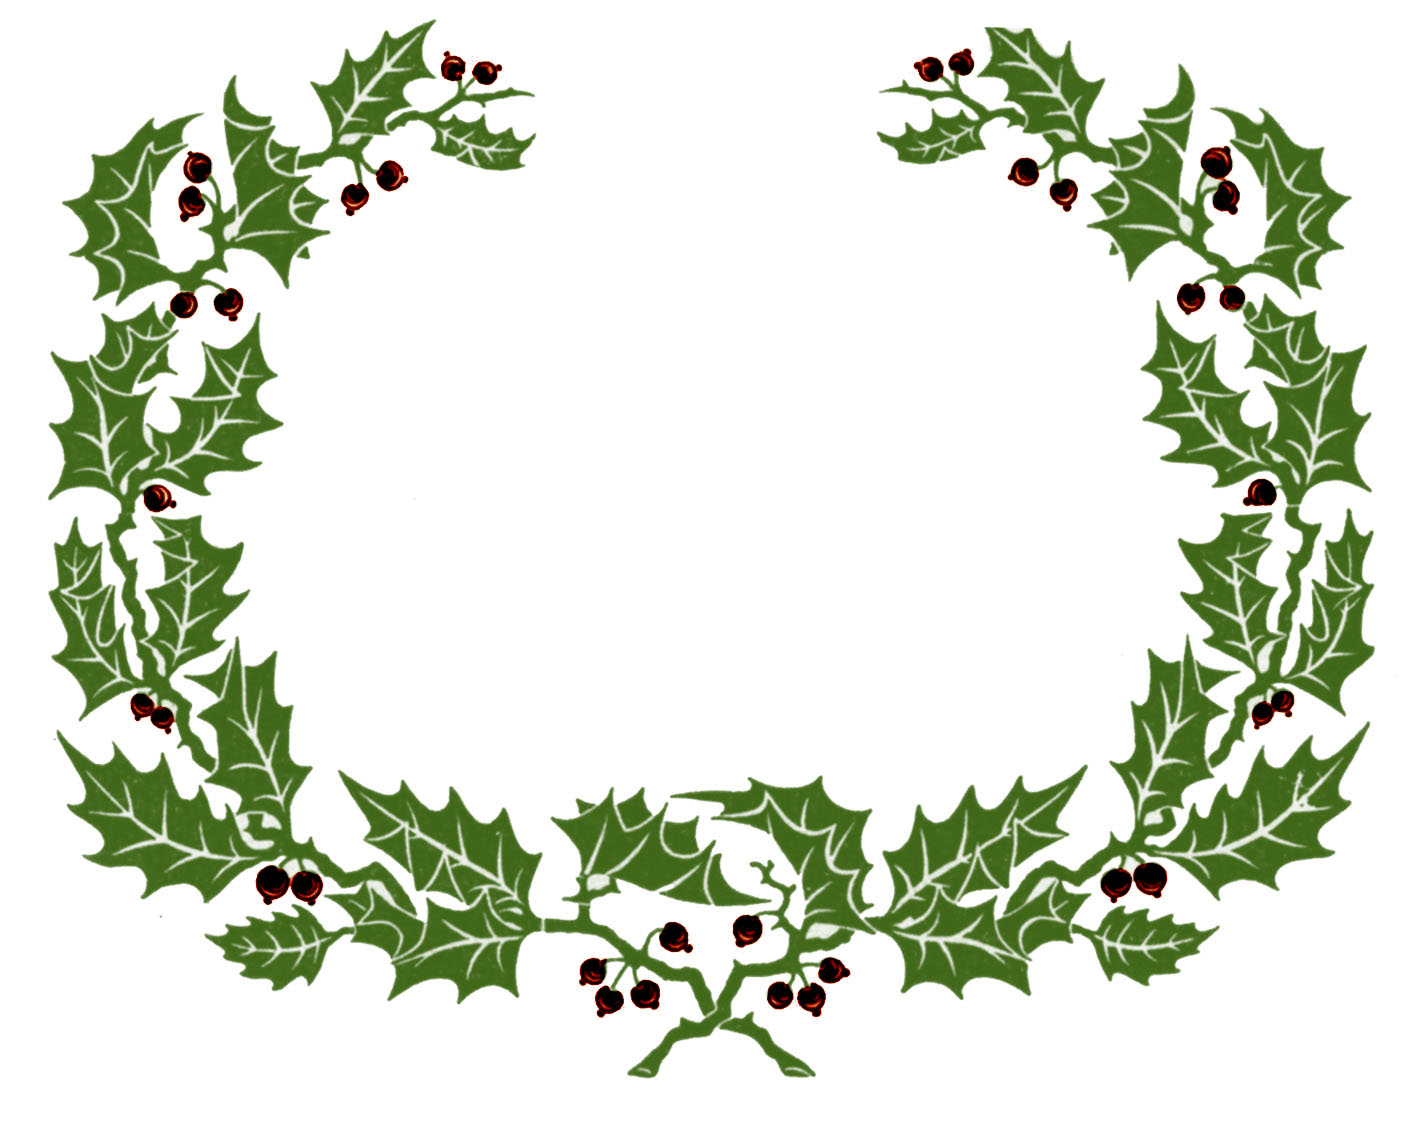 Vintage clip art holly wreath graphic frame the graphics fairy